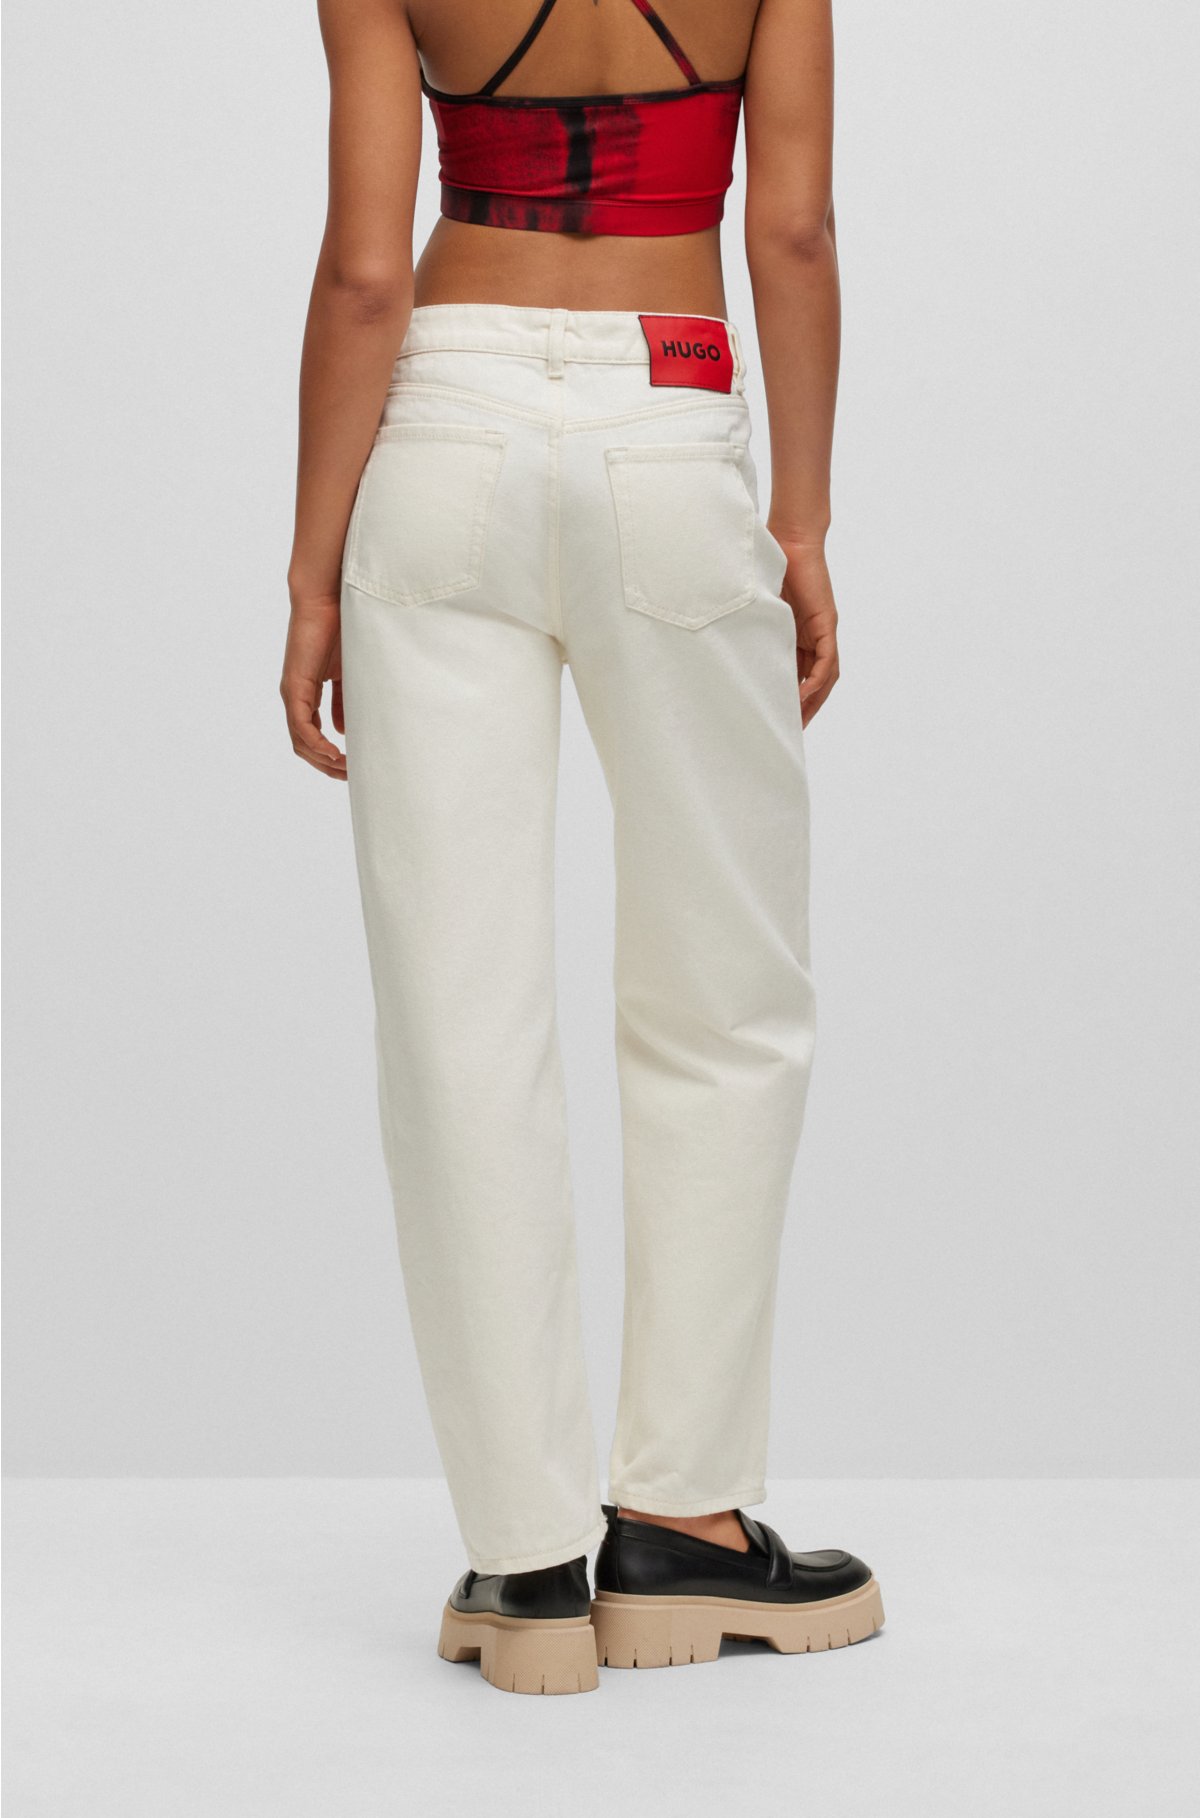 HUGO - Relaxed-fit jeans with criss-cross waistband